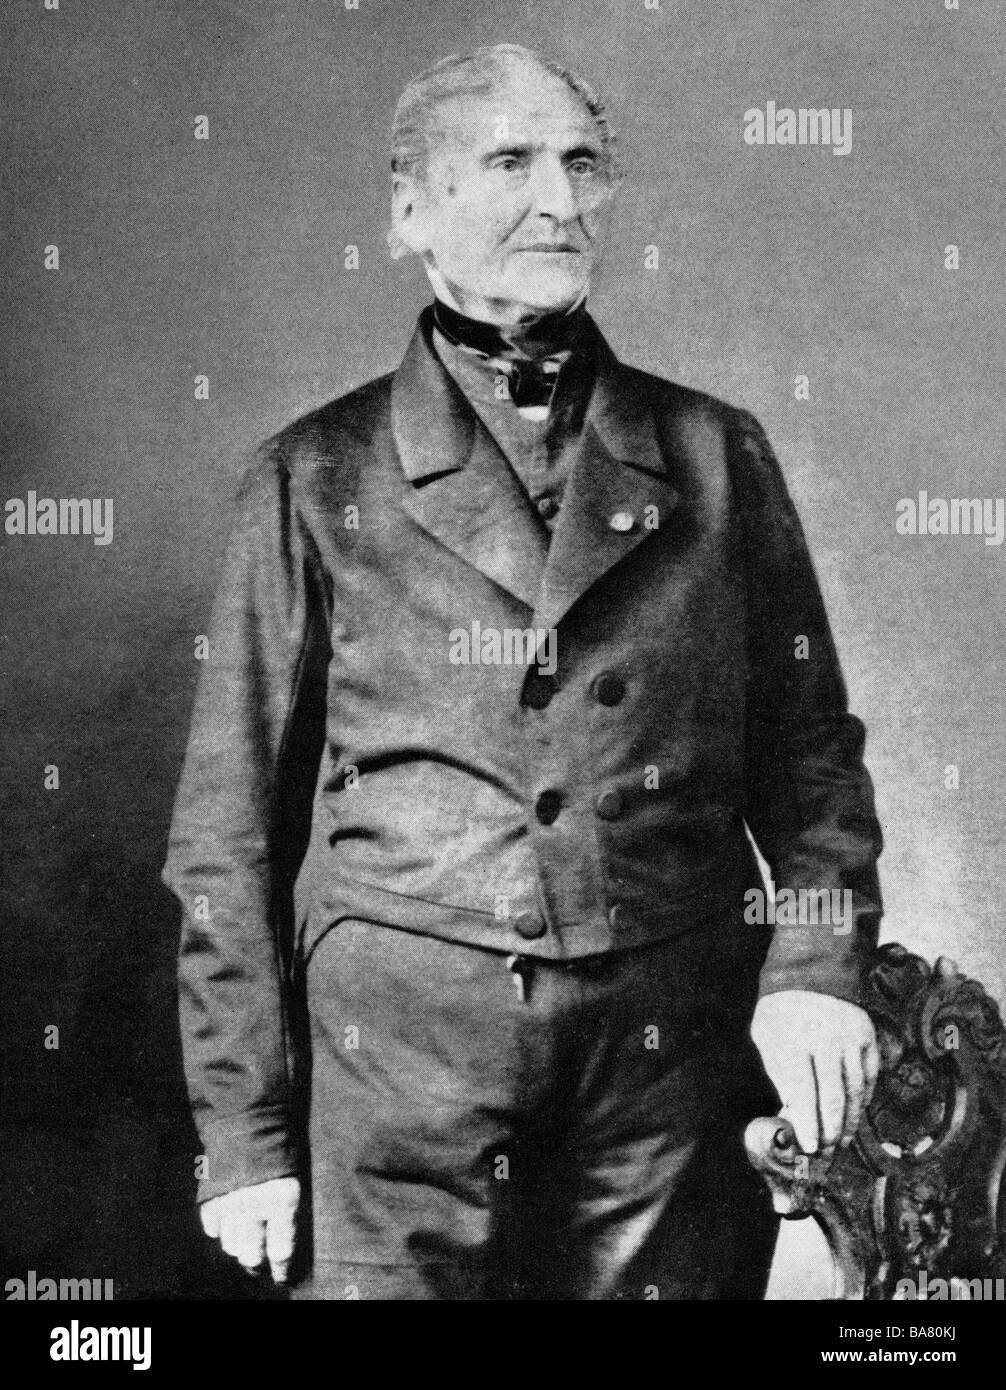 Cruveilhier, Jean, 9.2.1791 - 10.3.1874, French medical doctor, half  length, after photography, 19th century Stock Photo - Alamy